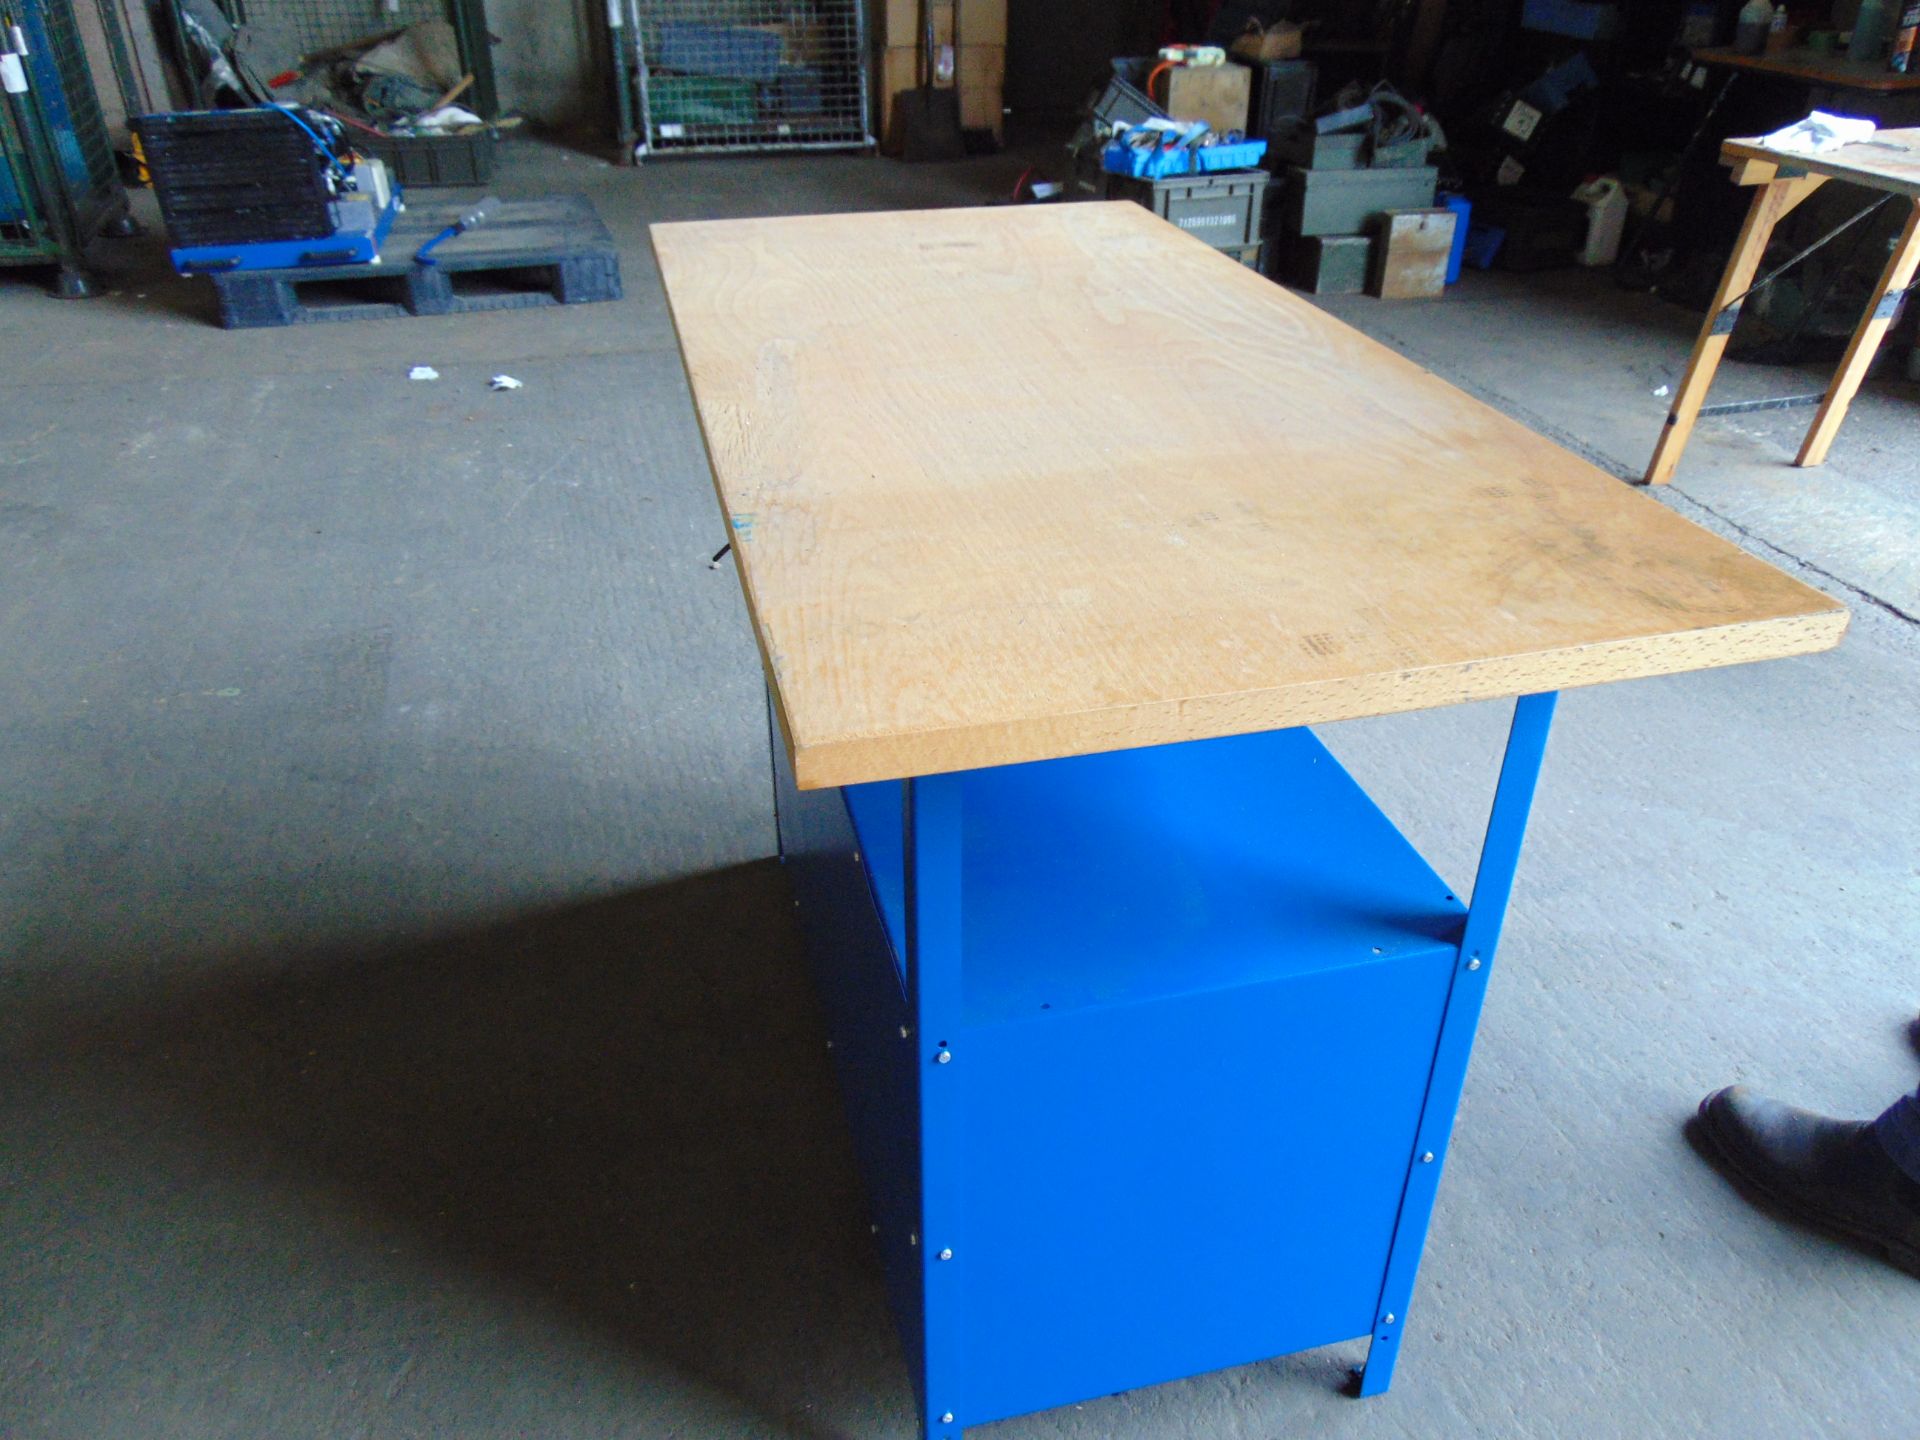 Clarke Workshop Bench c/w Cupboard ad Draws Wooden Top as new from MoD - Image 4 of 4